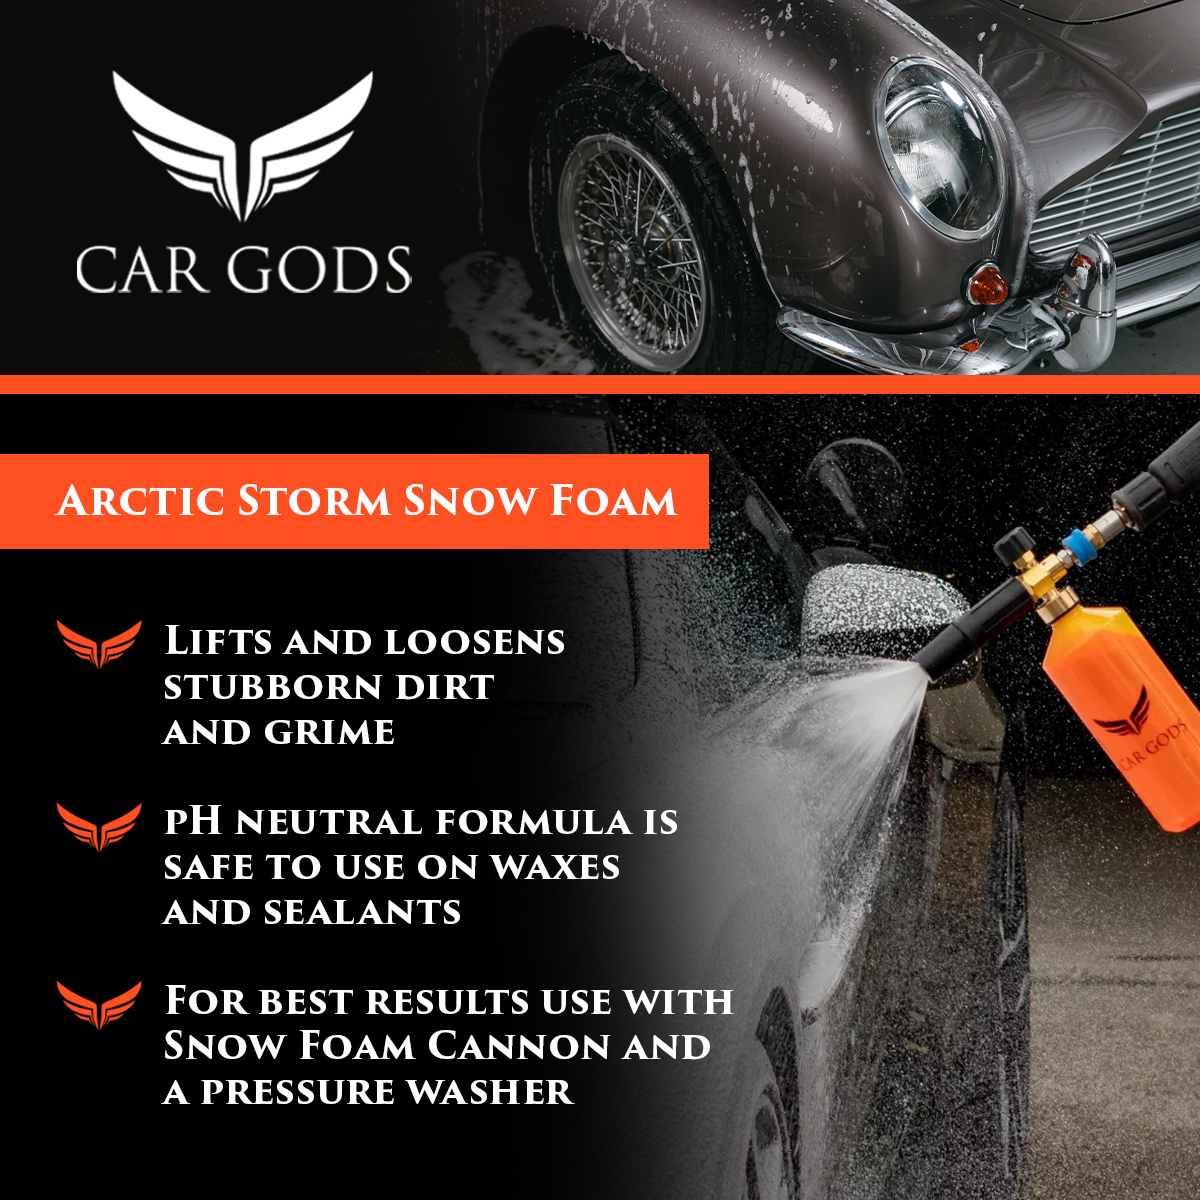 Car Gods Arctic Storm Snow Foam. Lift, loosen, and wash away stubborn grime easily with Arctic Storm’s pH neutral formula. Safe to use on waxes and sealants the blood orange scented snow foam gets best results when used with Car Gods Snow Foam Cannon and a pressure washer.